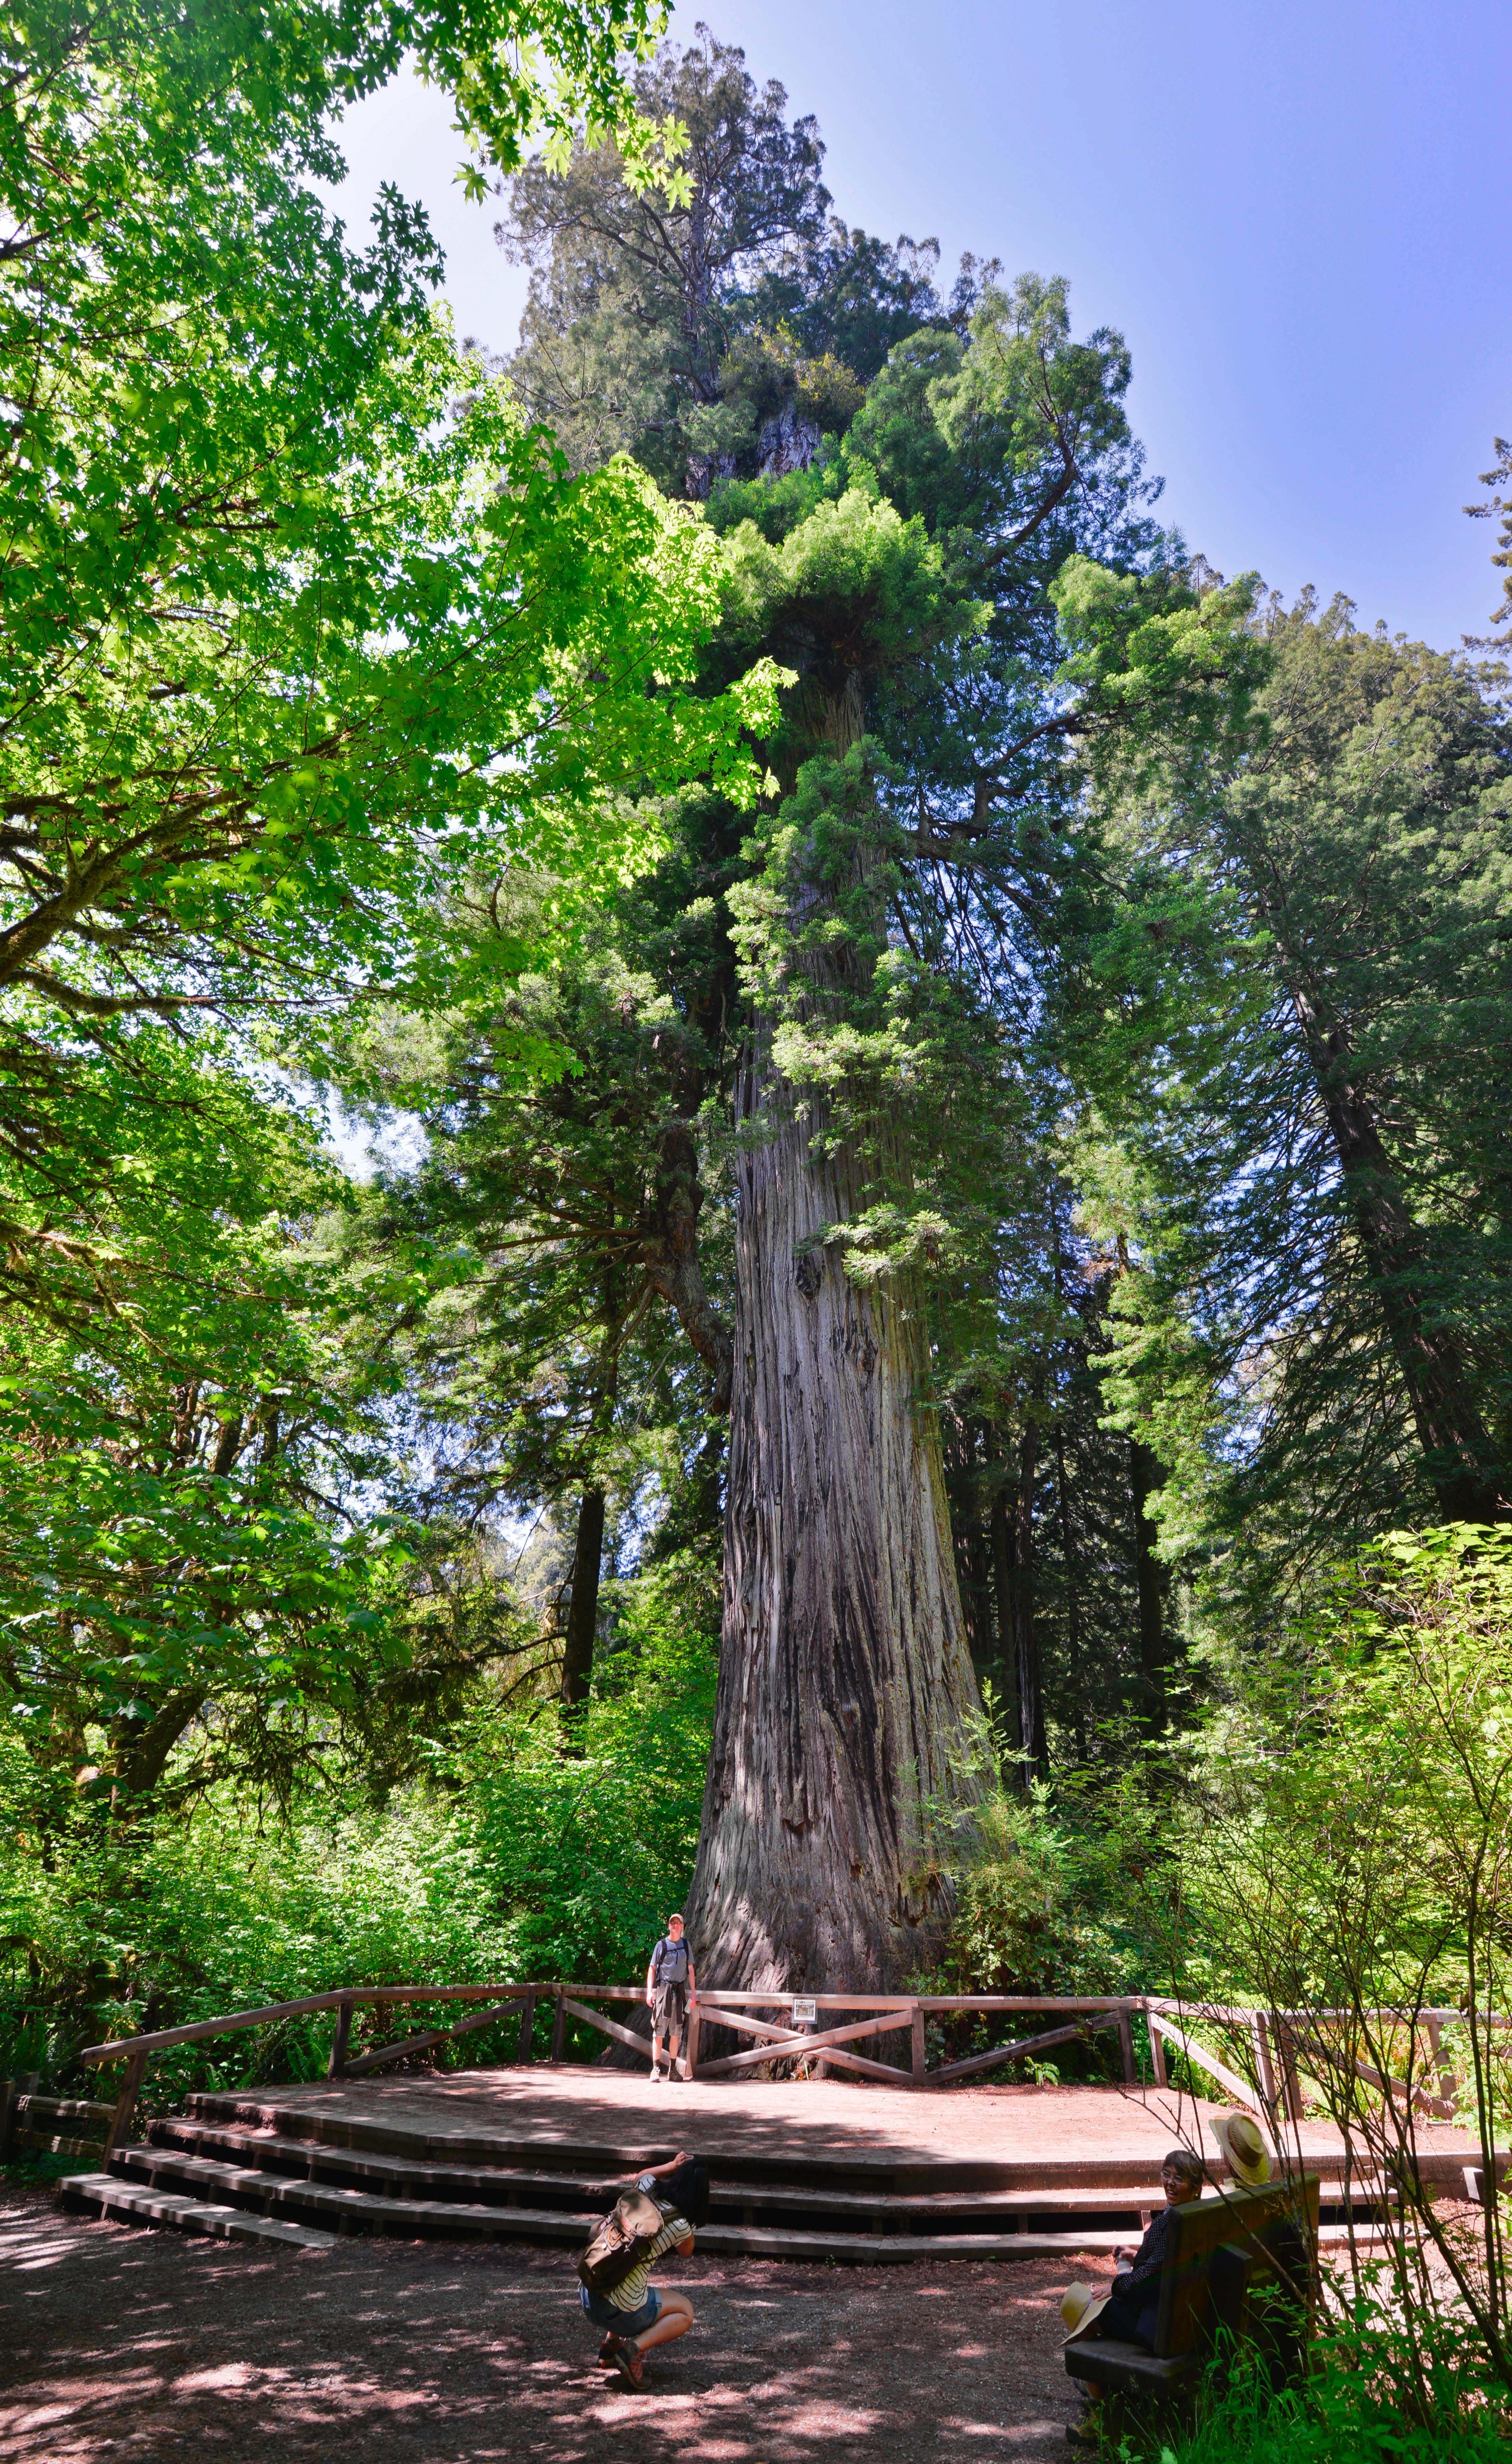 Visitors pose with one of the widest Redwood trees.